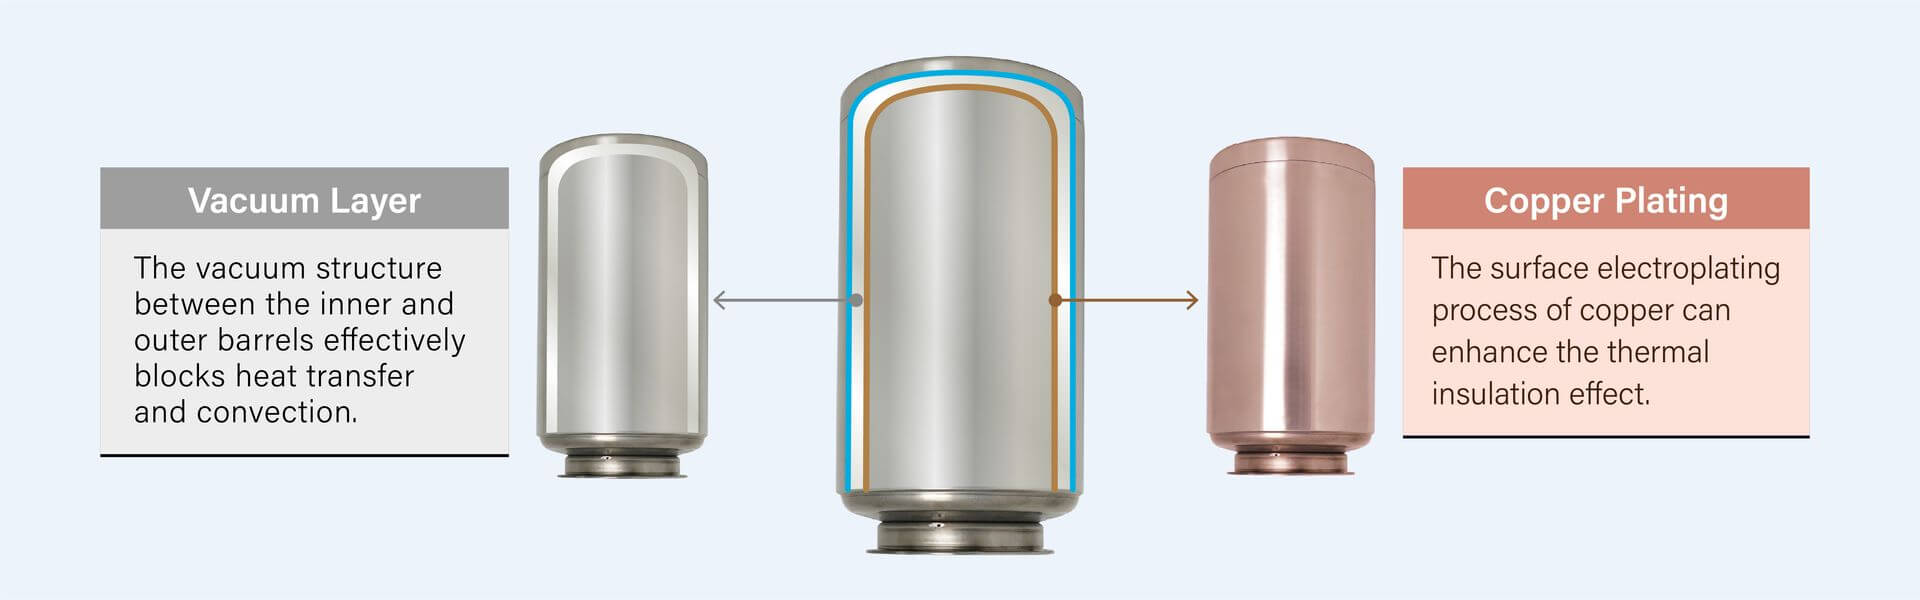 Vacuum Layer + Copper Plating Design Ensures Hot Water Remains at an Elevated Temperature for Extended Periods with Minimal Energy Consumption